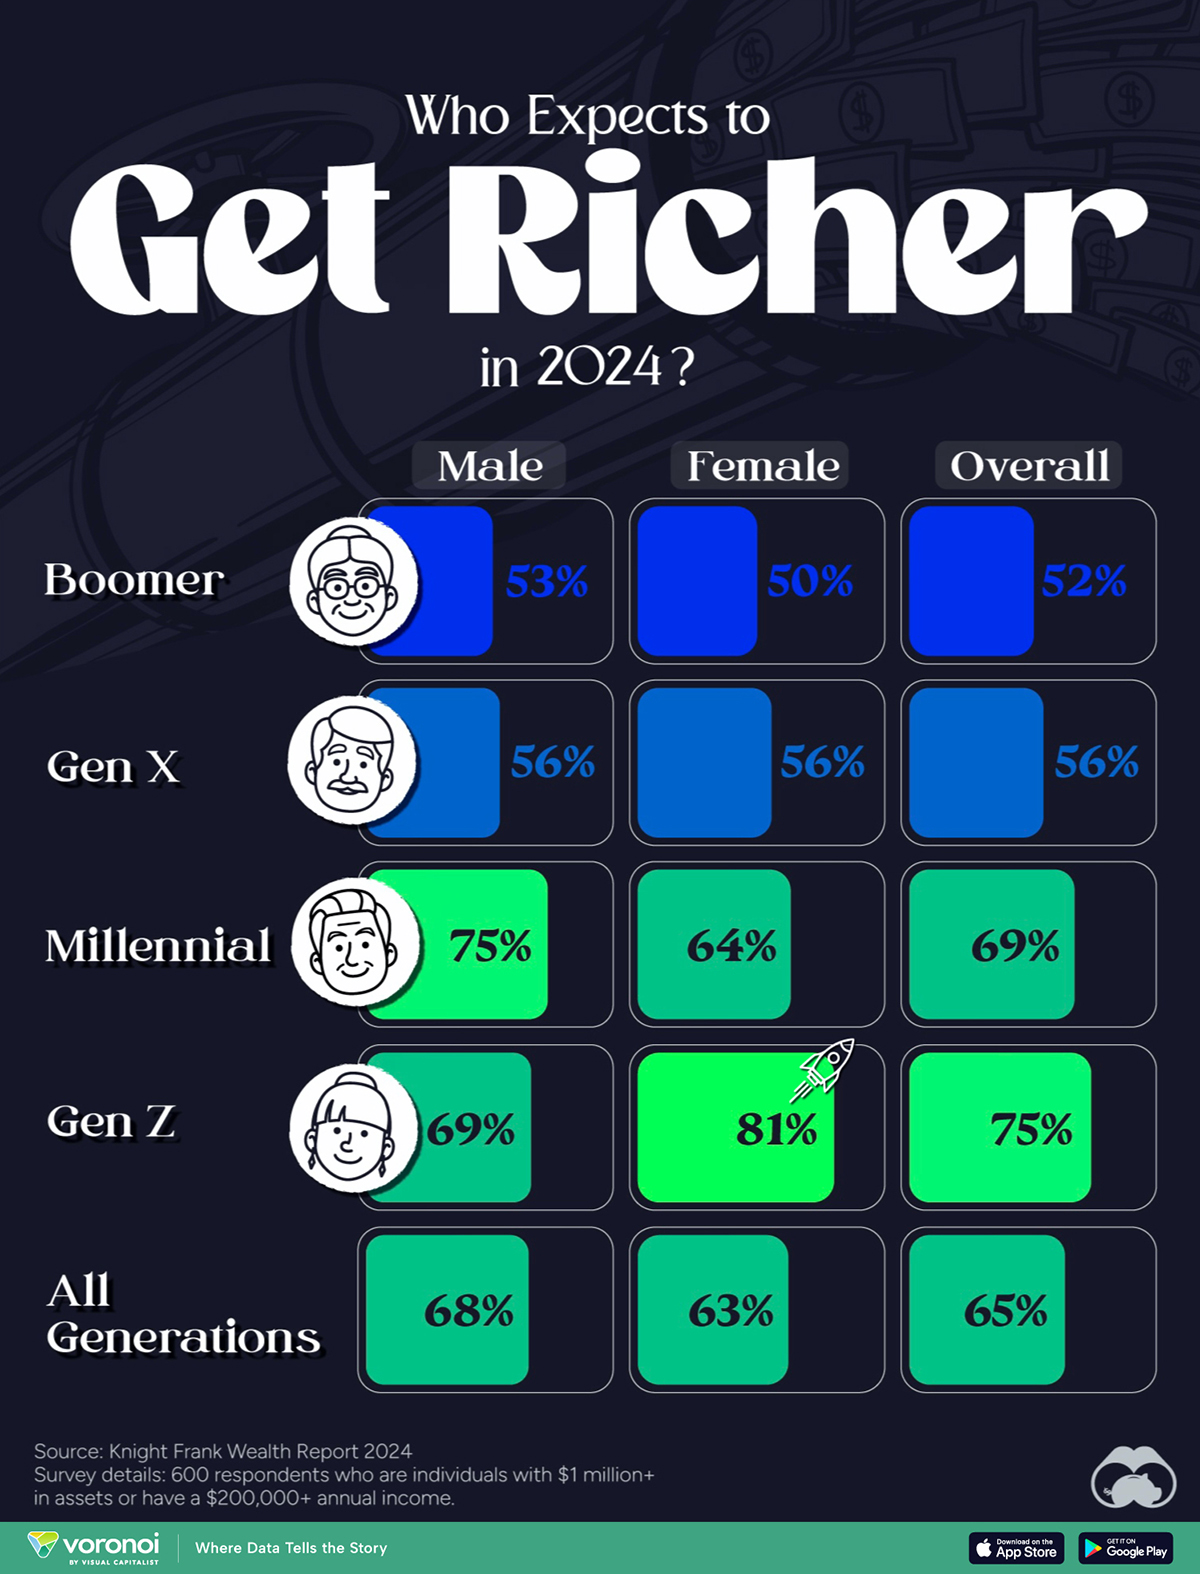 A graph showing the percentage of people surveyed in the Knight Frank Next Gen Survey, sorted by generation and gender, and whether they anticipate a wealth increase in 2024.